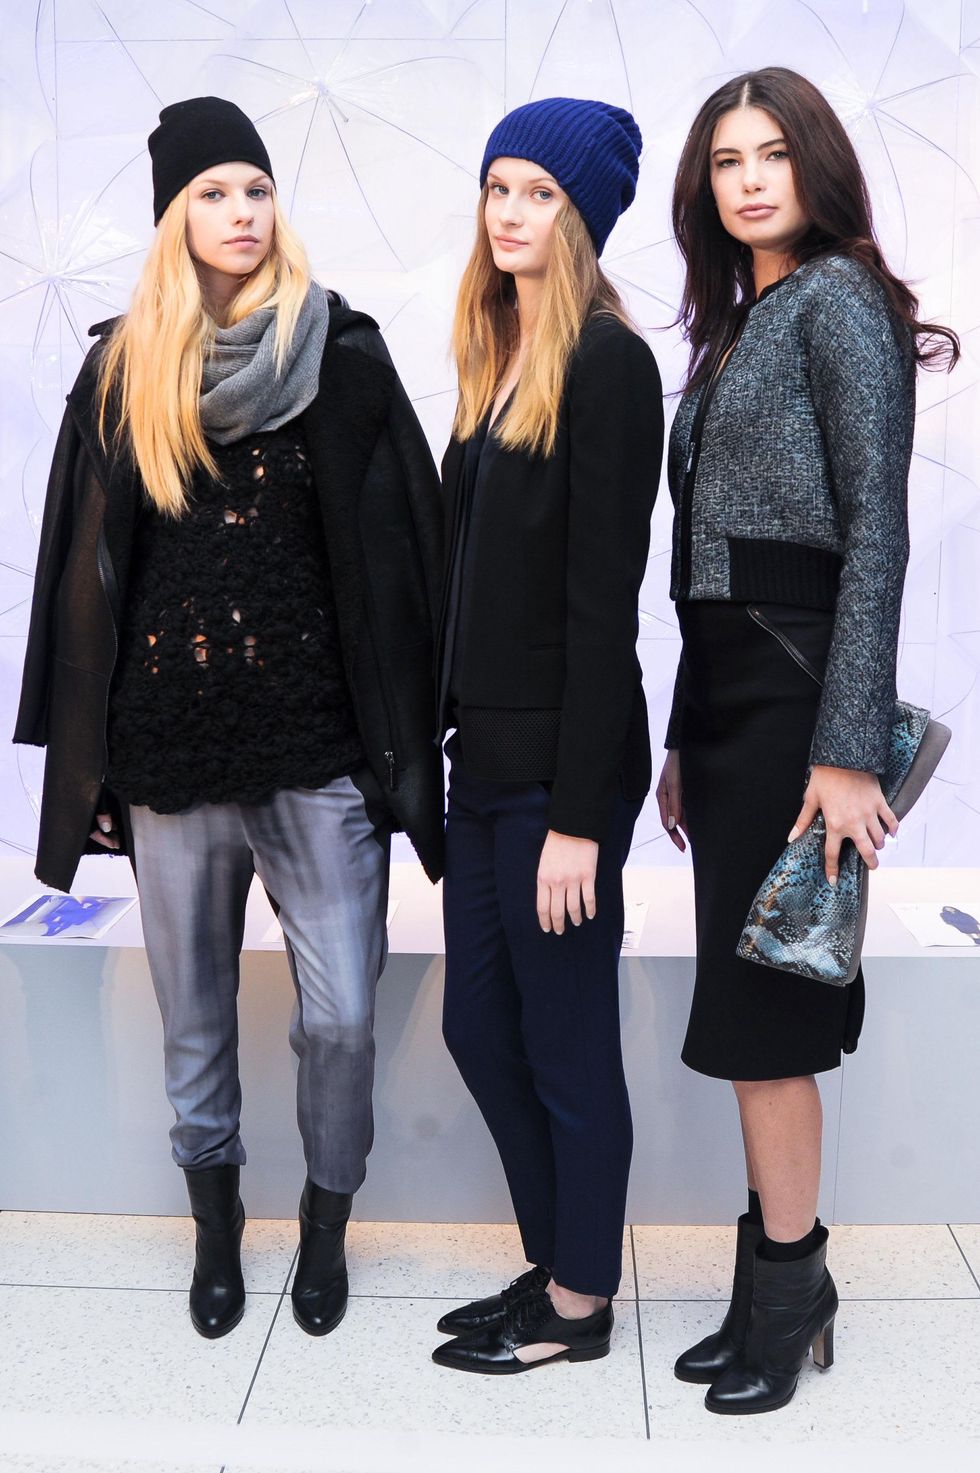 Elie Tahari fall collection February 2014